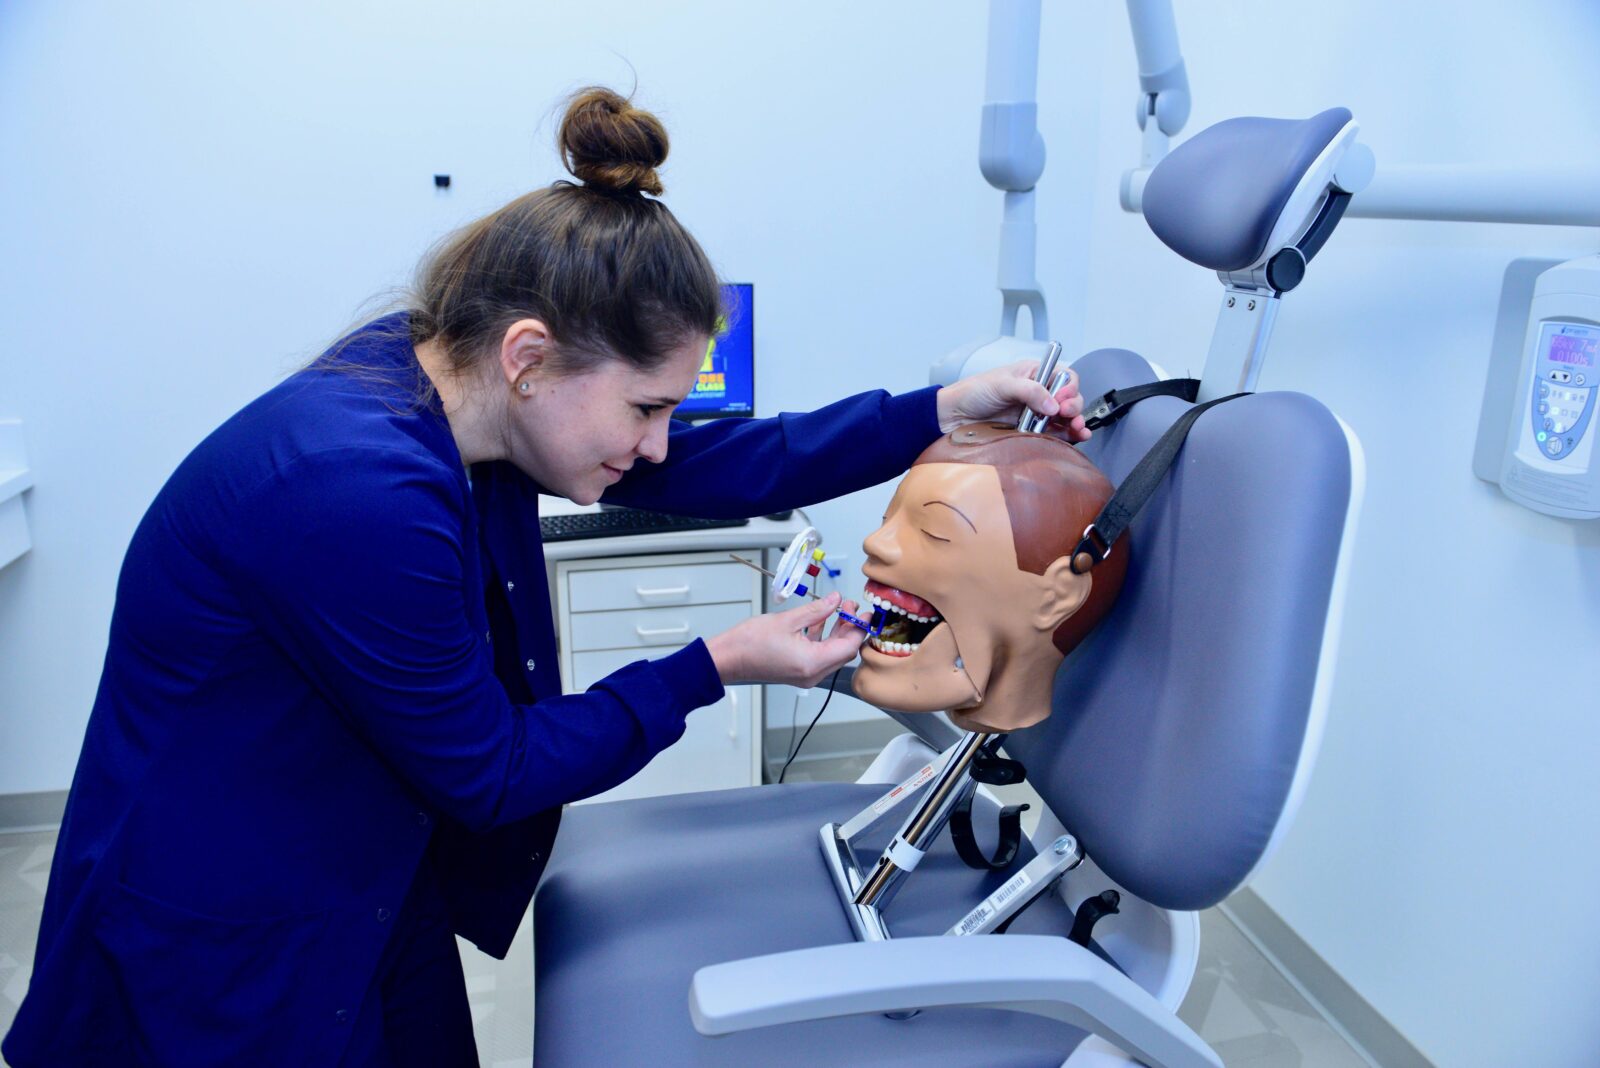 Student practicing dental services on a dummy in a STLCC new teaching lab